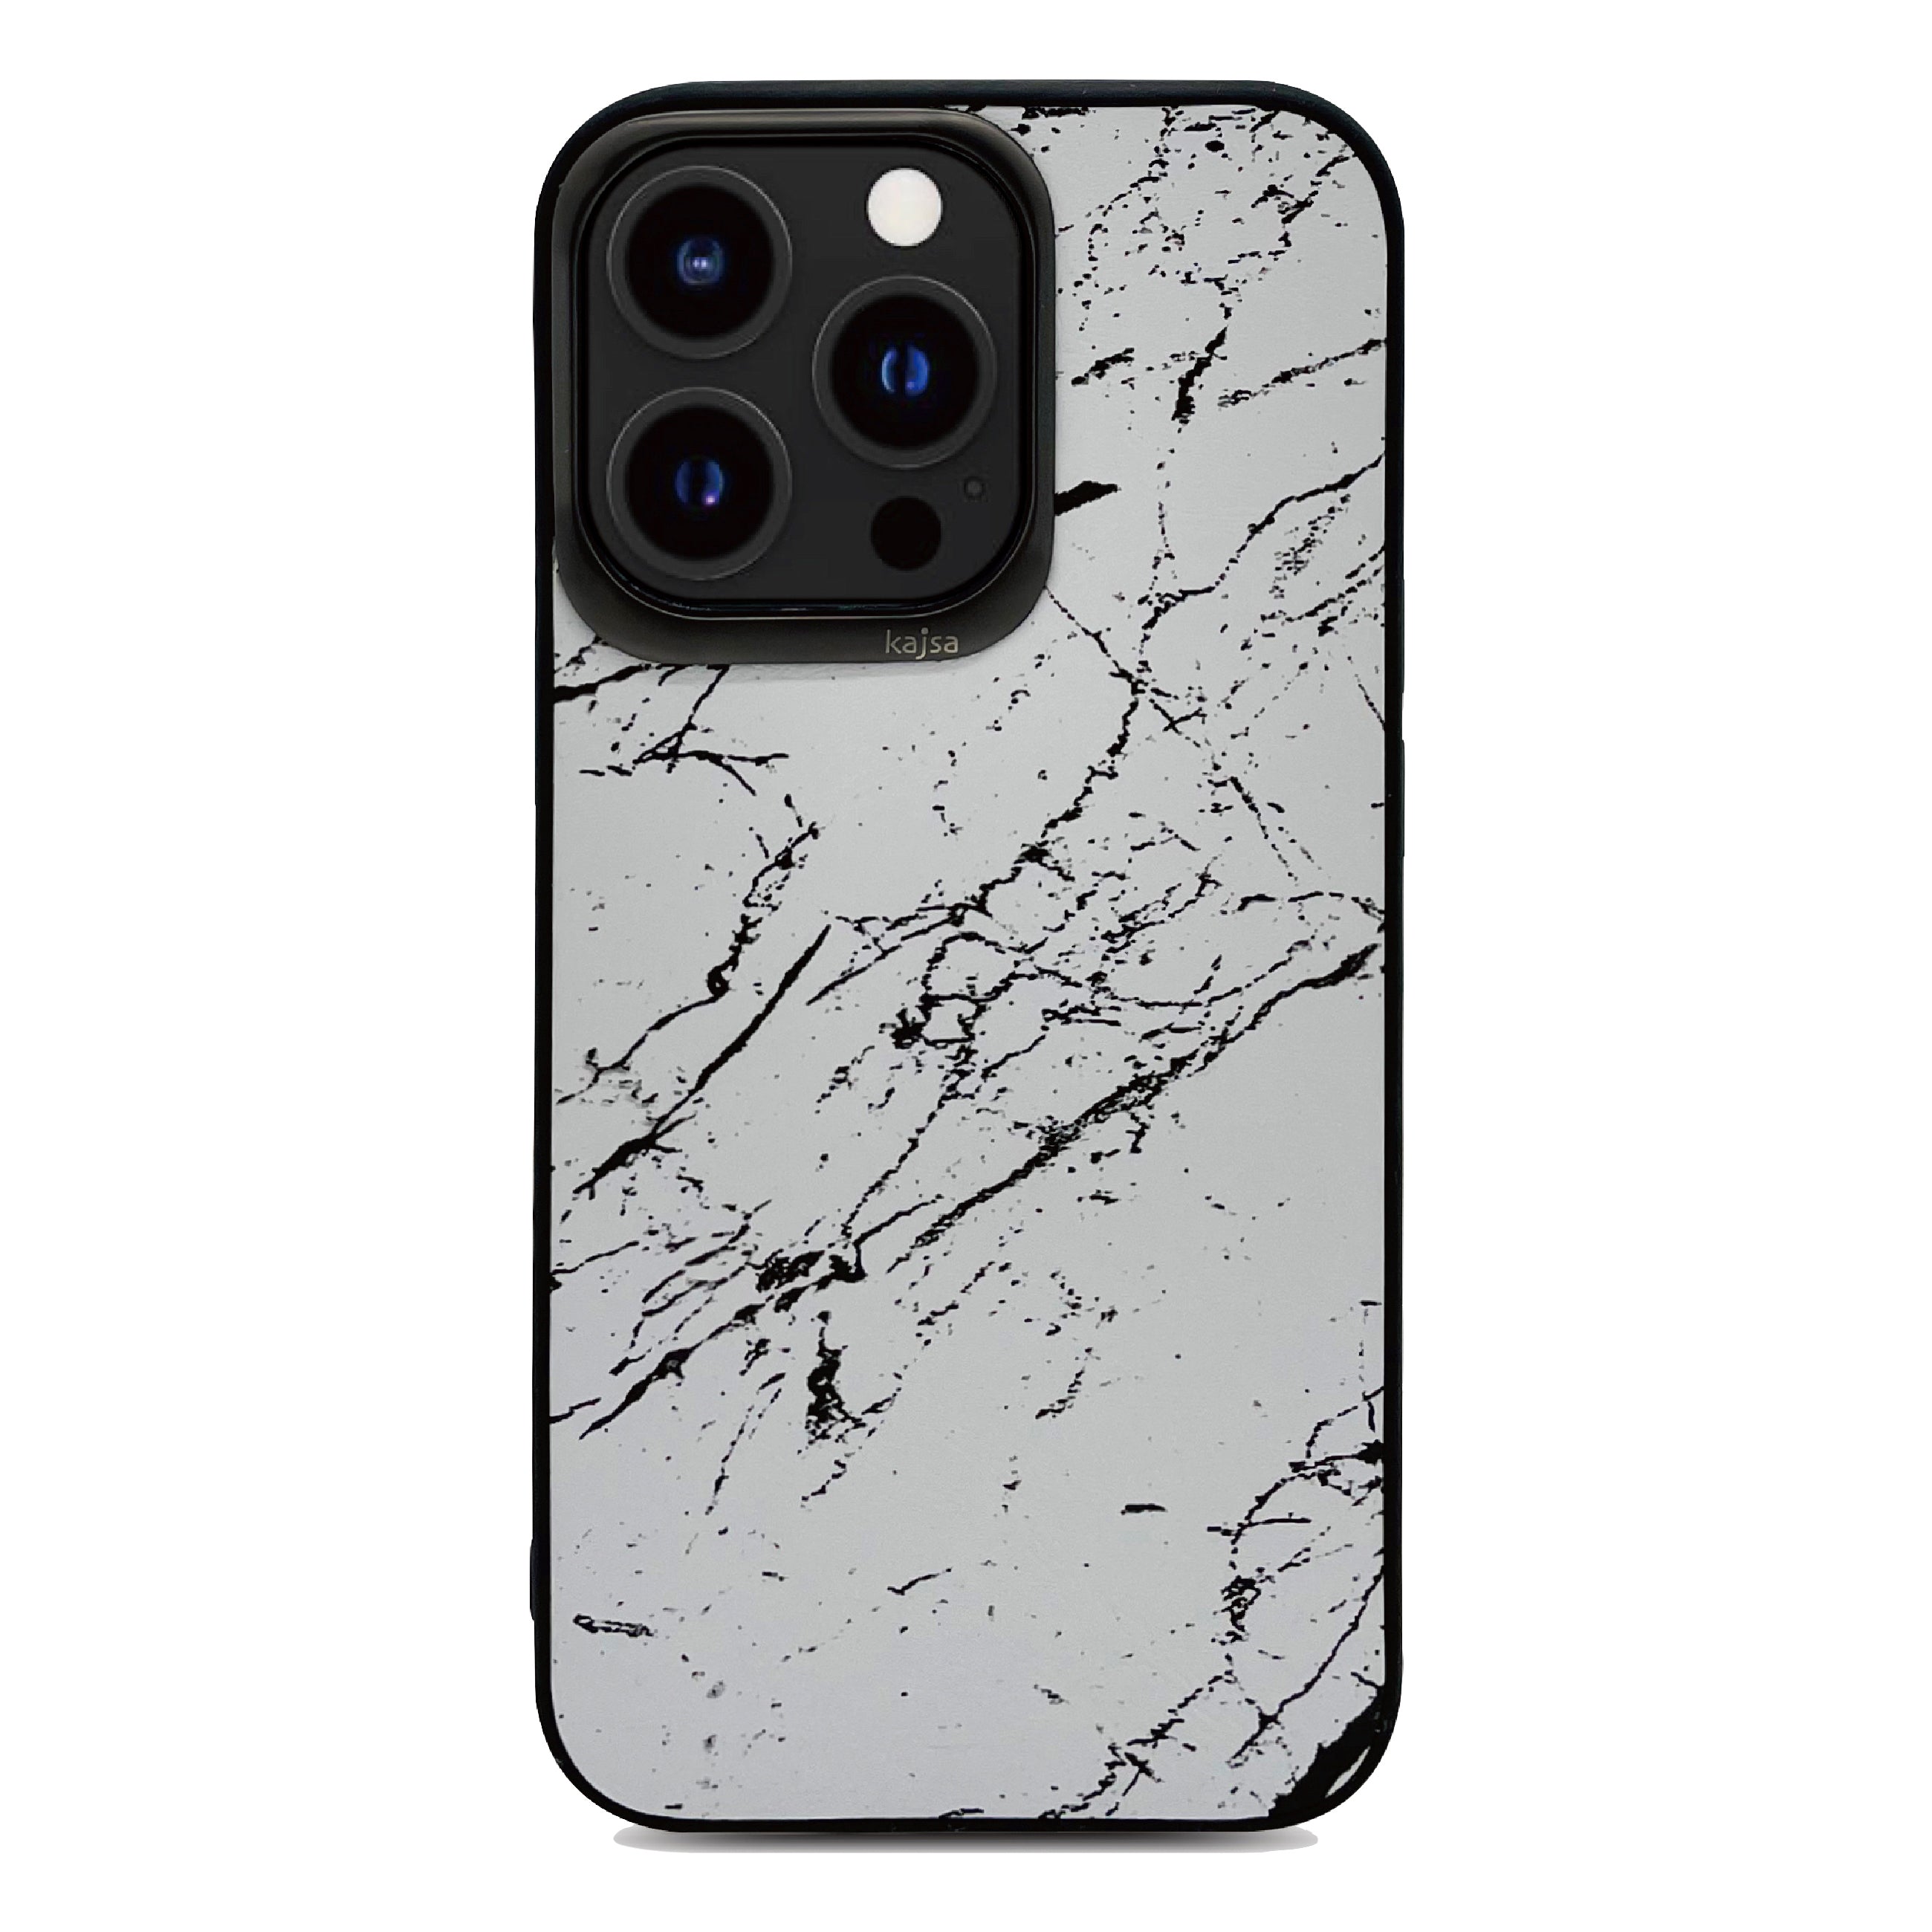 Preppie Collection - Marble PU Back Case for iPhone 13-Phone Case- phone case - phone cases- phone cover- iphone cover- iphone case- iphone cases- leather case- leather cases- DIYCASE - custom case - leather cover - hand strap case - croco pattern case - snake pattern case - carbon fiber phone case - phone case brand - unique phone case - high quality - phone case brand - protective case - buy phone case hong kong - online buy phone case - iphone‎手機殼 - 客製化手機殼 - samsung ‎手機殼 - 香港手機殼 - 買電話殼